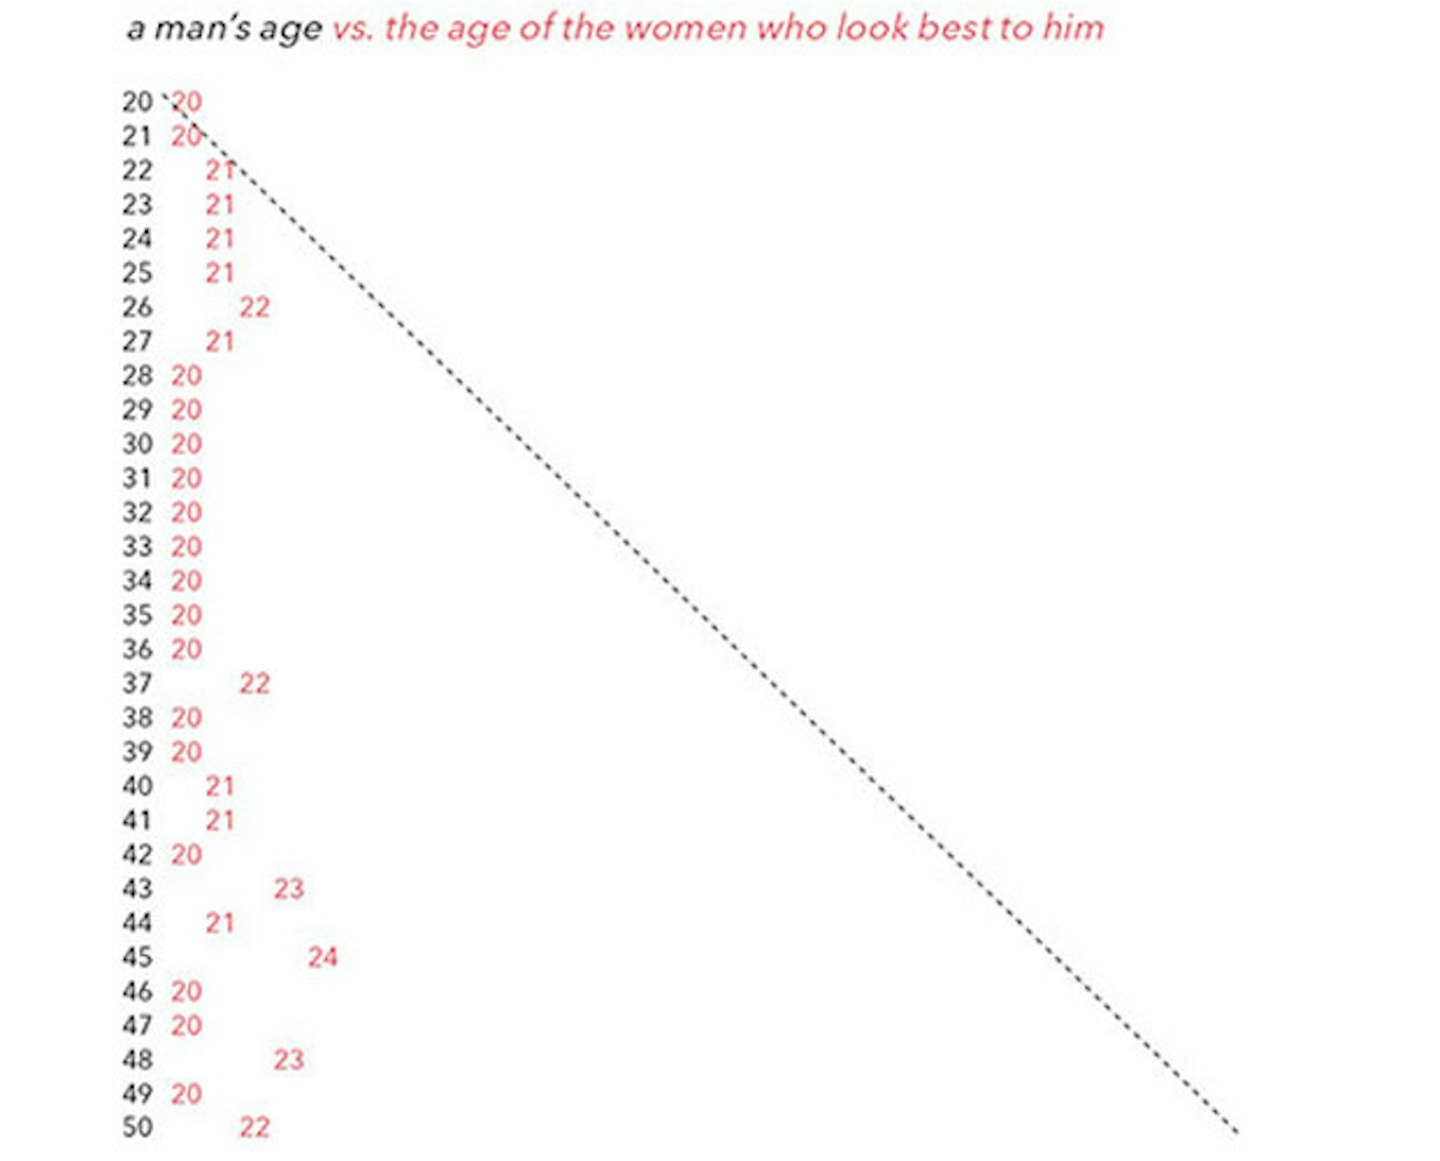 dnews-files-2014-09-dating-ages-graph-2-670-jpg